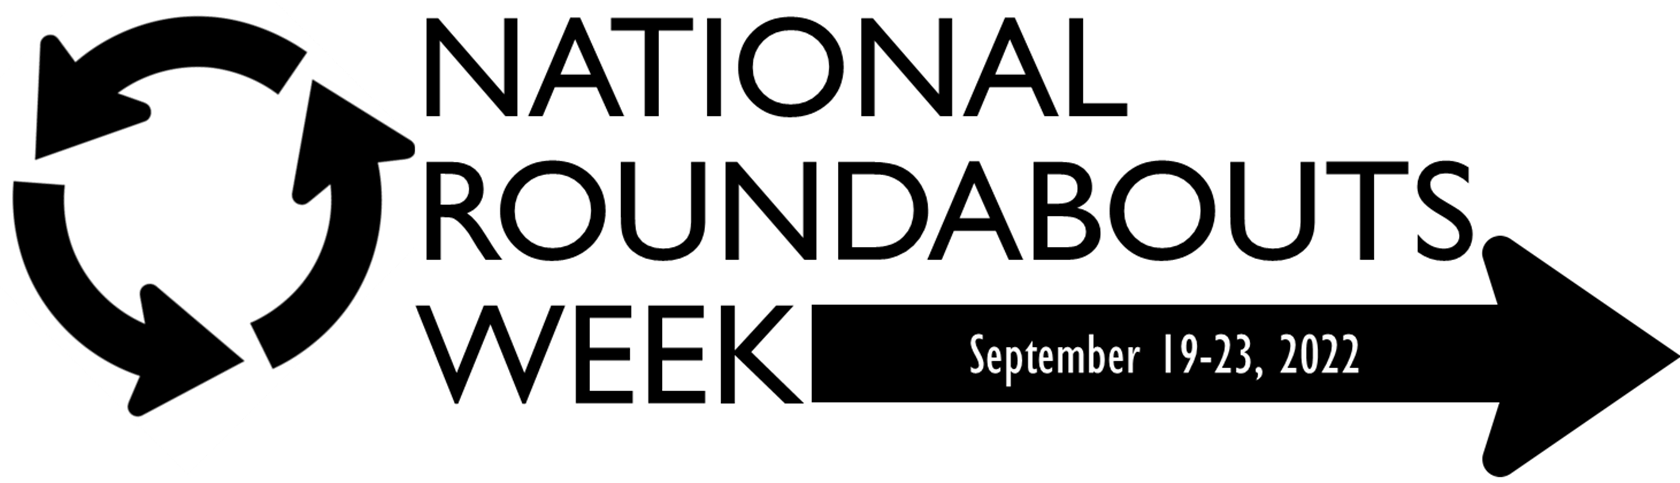 National Roundabouts Week - September 19-23, 2022